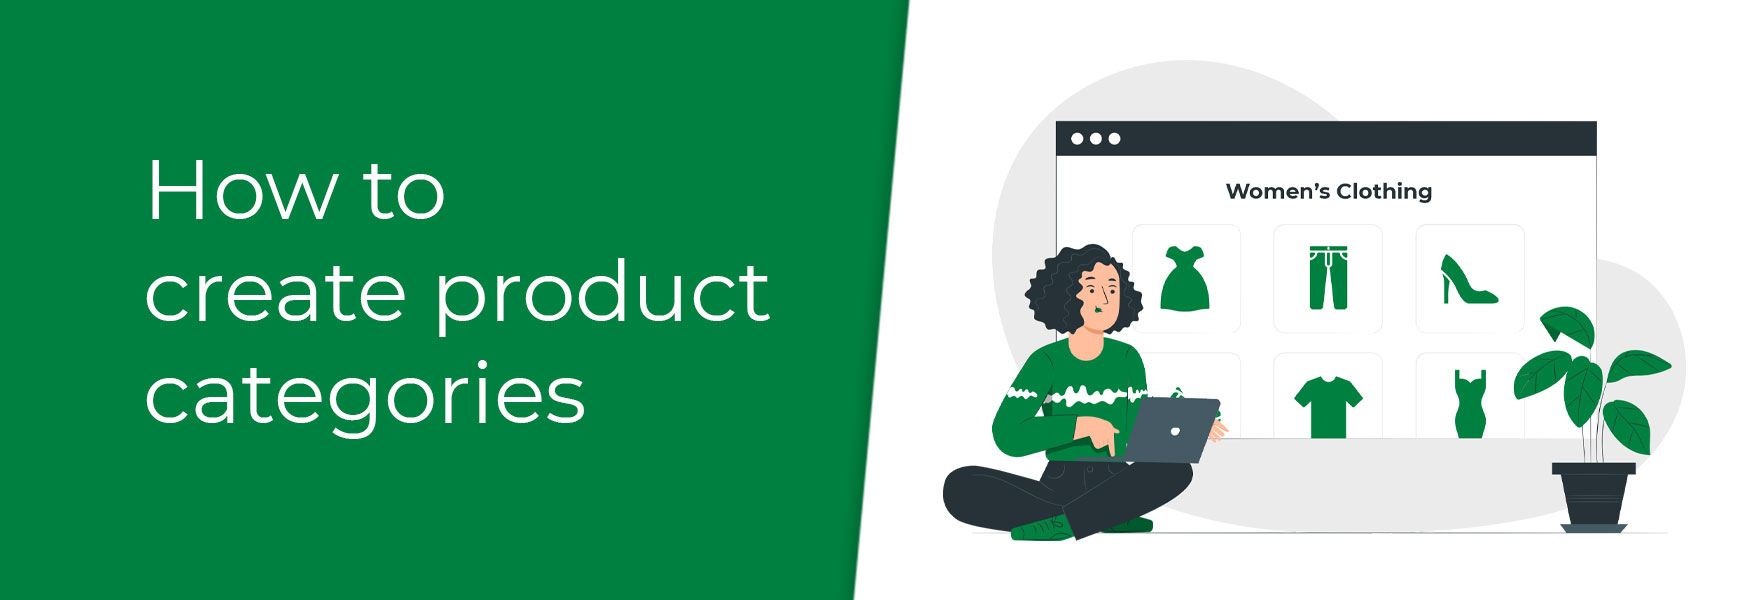 How to create product categories